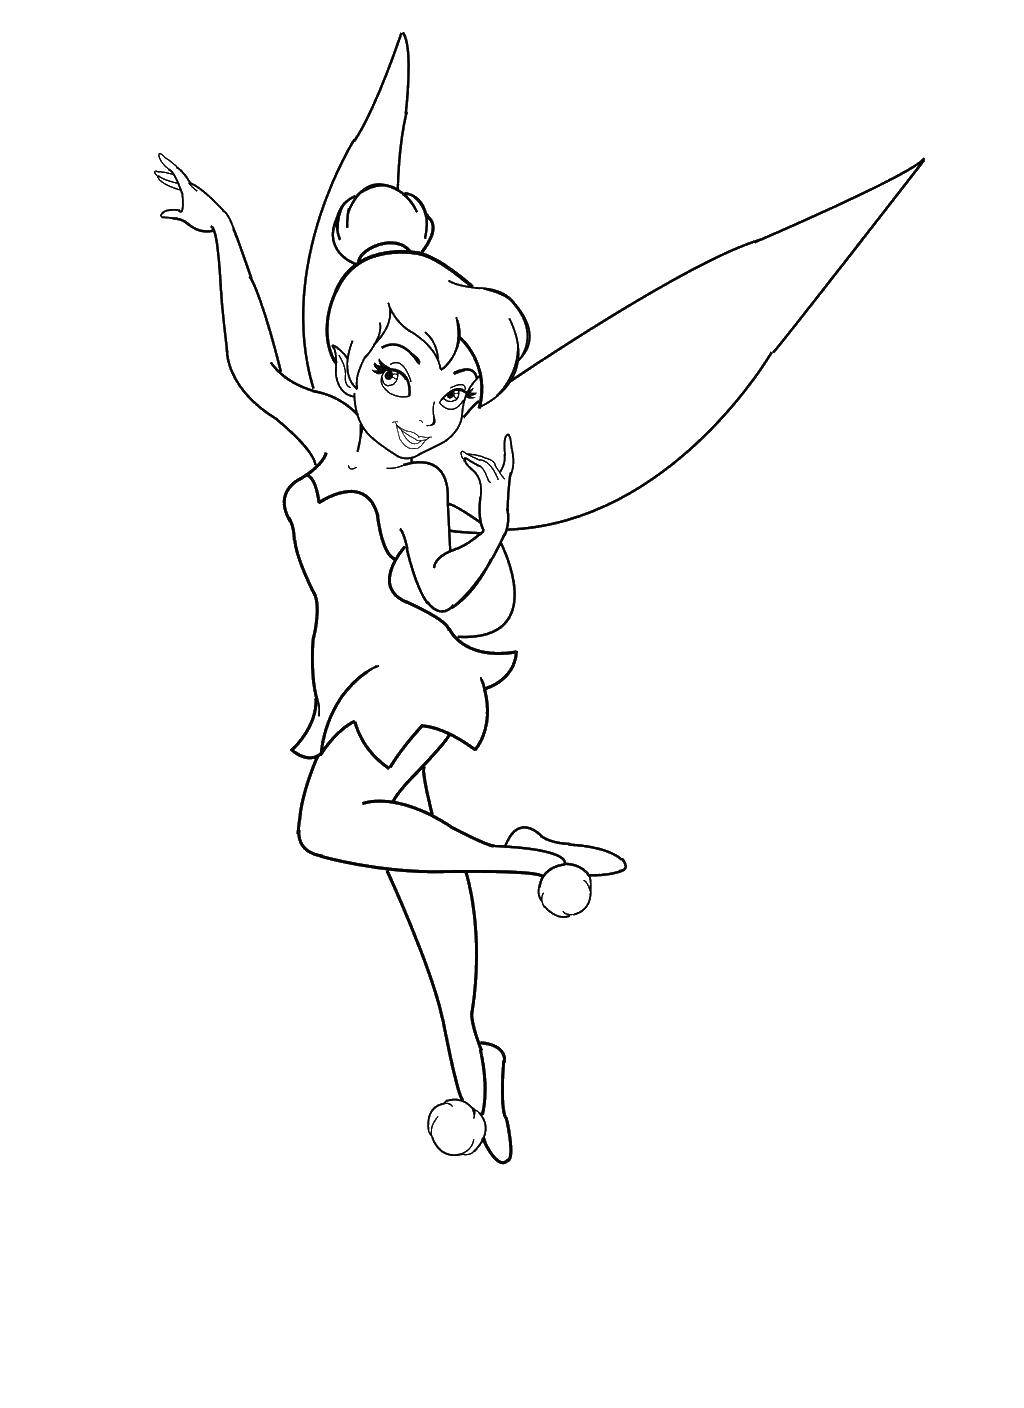 Coloring Tinker bell dancing. Category Disney cartoons. Tags:  fairy, Dindin.